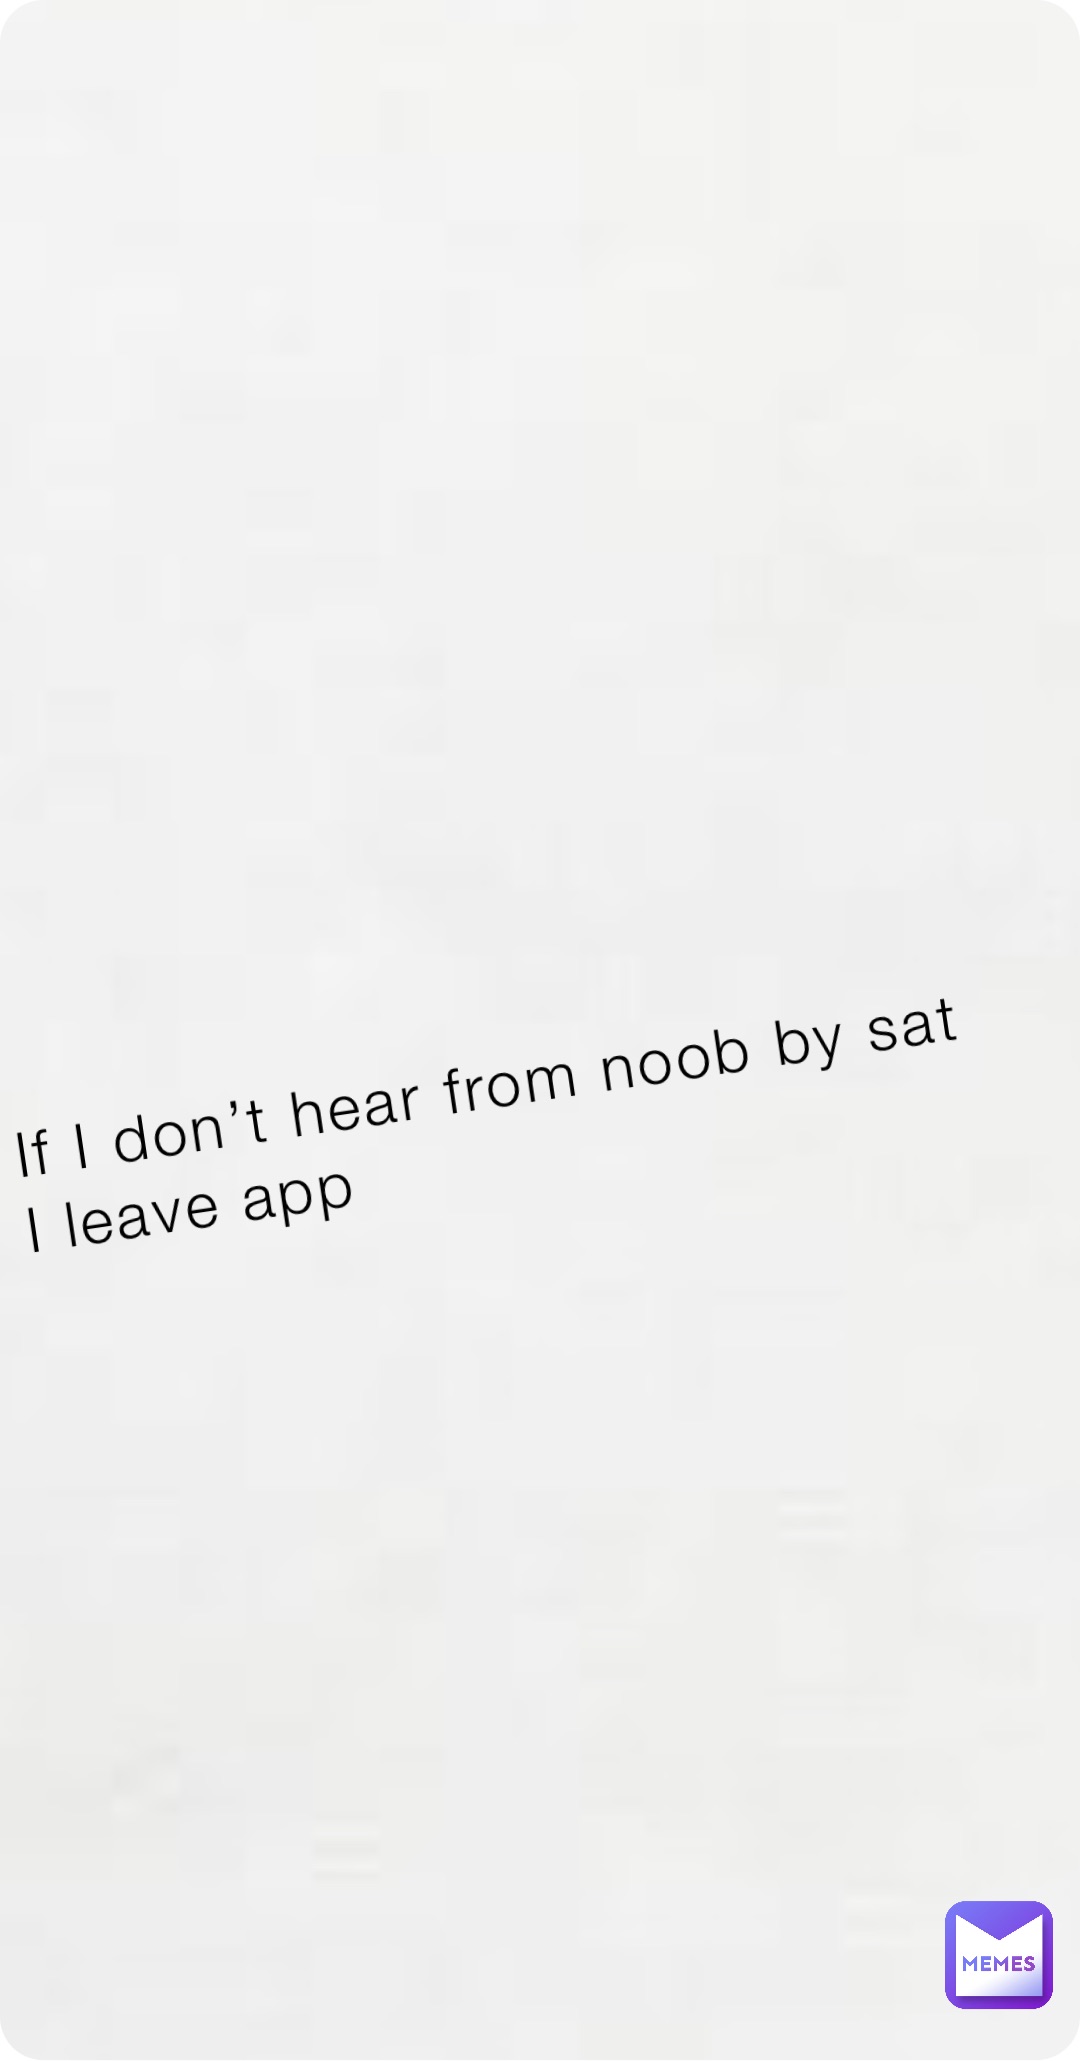 If I don’t hear from noob by sat I leave app